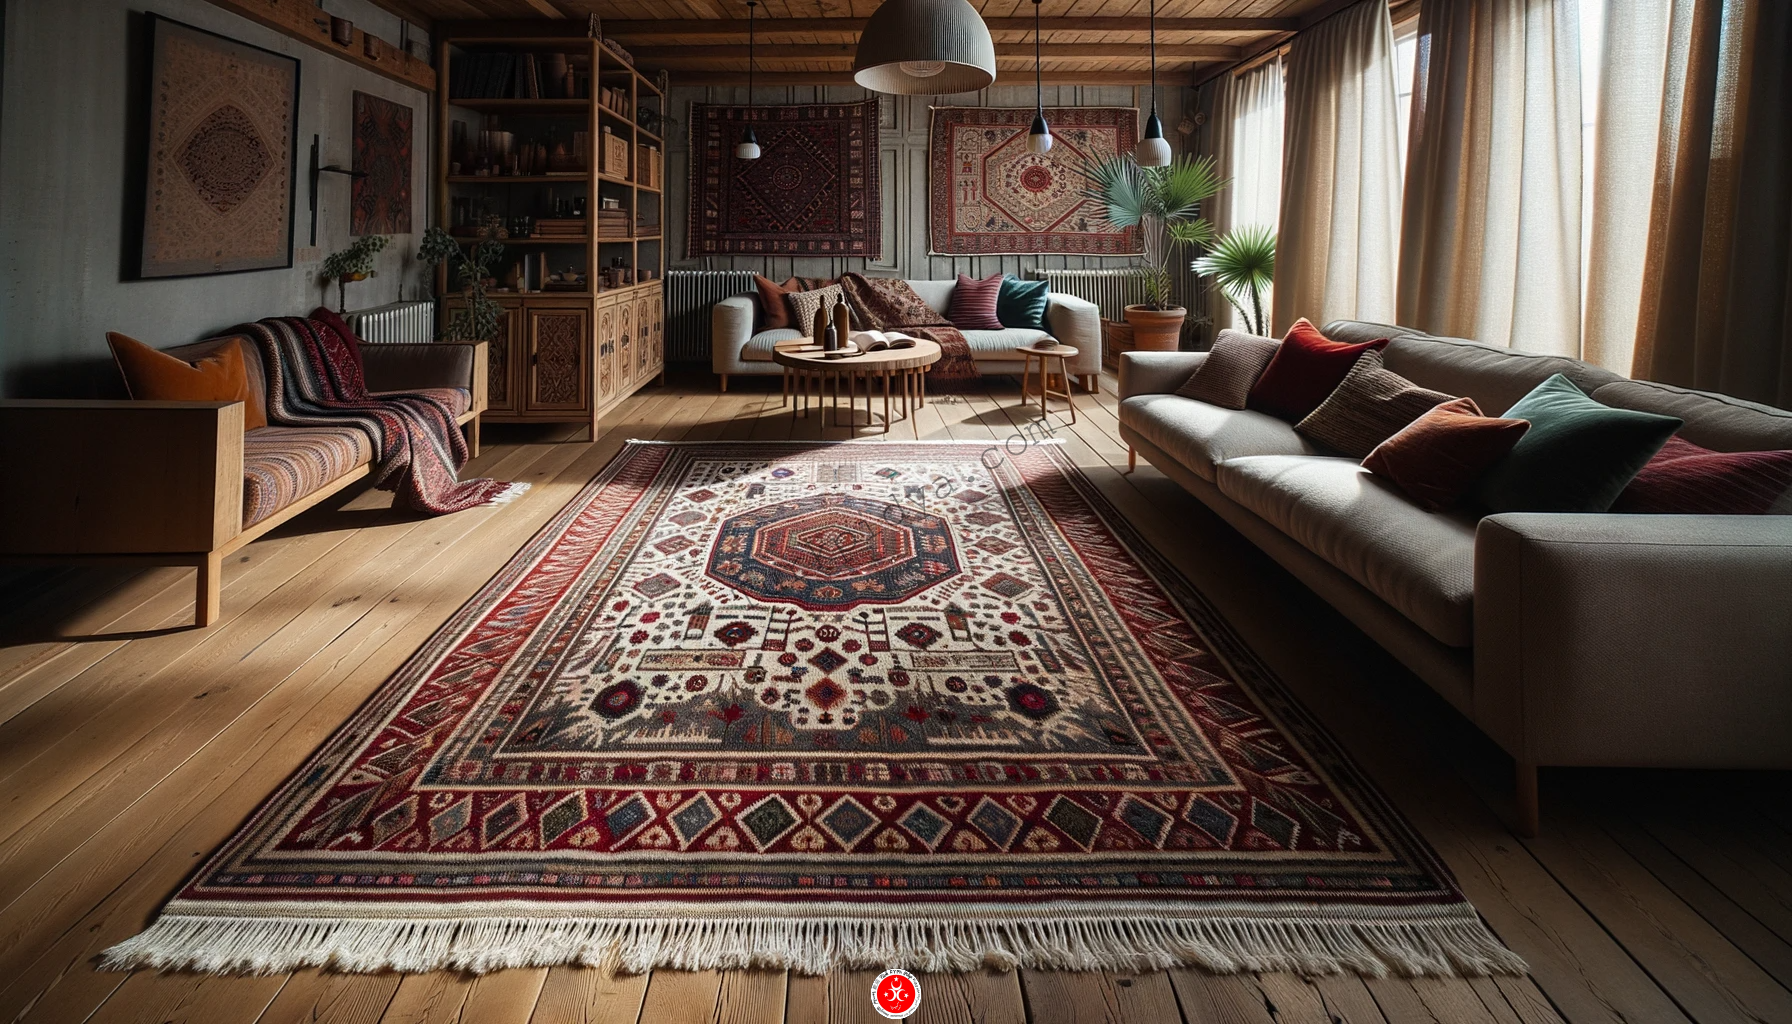 DALL%C2%B7E 2023 10 09 22.32.01 Photo of a handwoven Anatolian rug displayed in a well lit room. The rug showcases intricate patterns with dominant colors of crimson indigo and oli